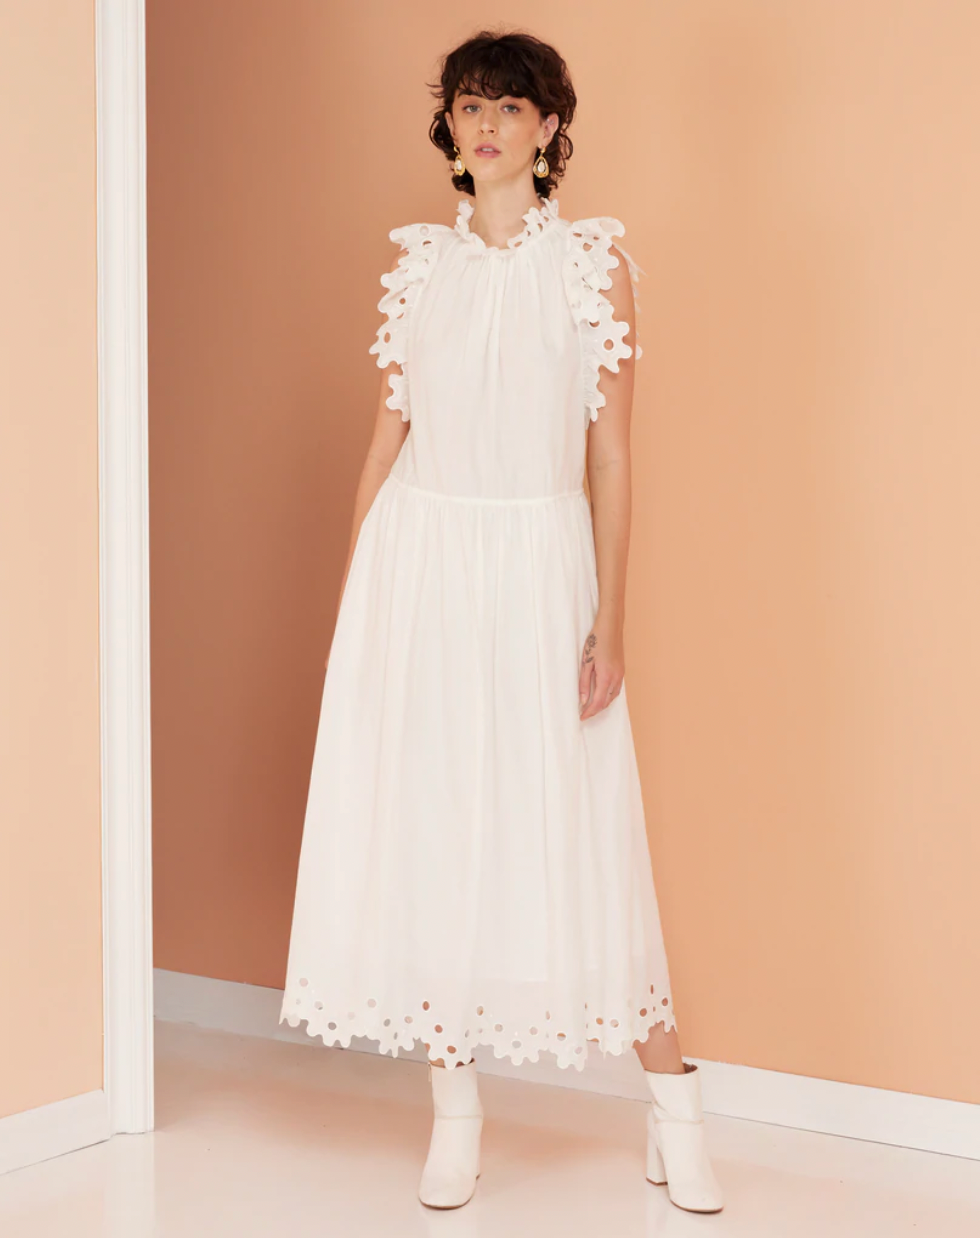 White dress with cut out details a ruffle sleeve and an open back